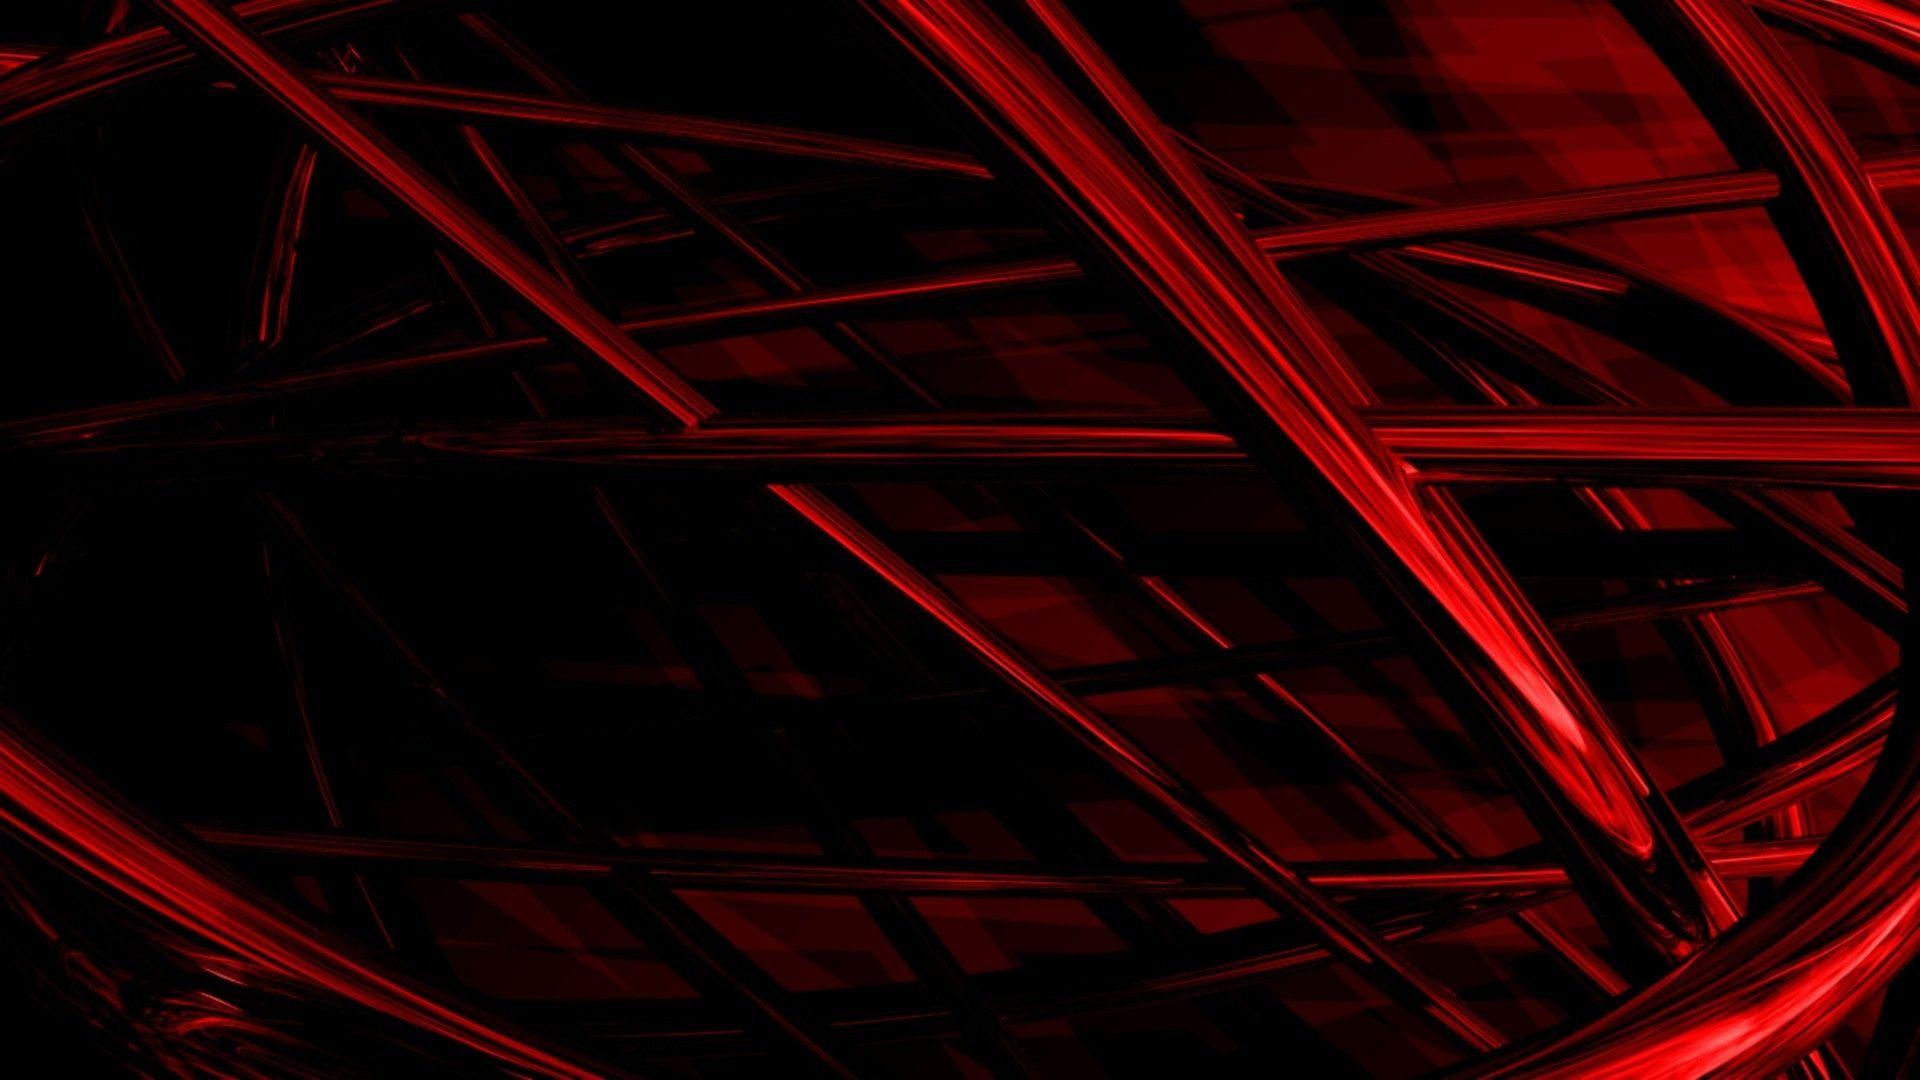 Download Wallpaper 1920x1080 lines, woven, dark, shadow, red Full HD